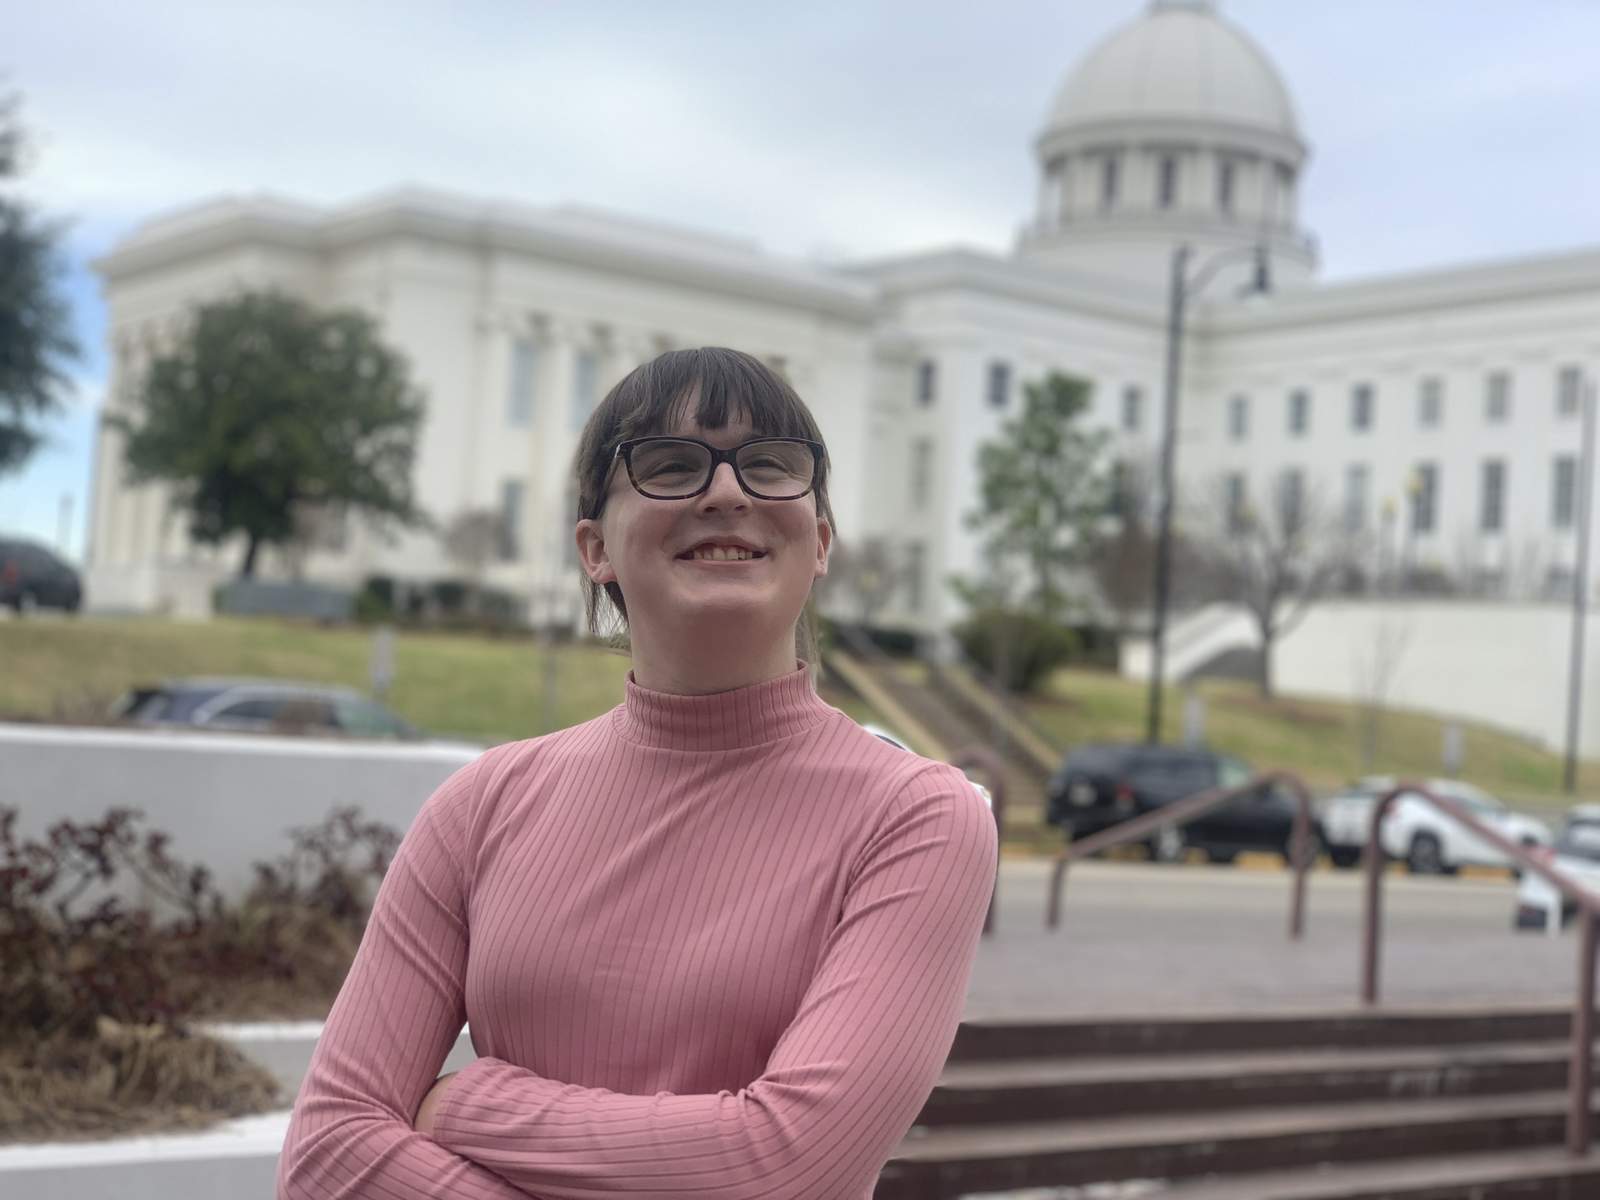 Trans teenagers fear Alabama push to outlaw gender treatment